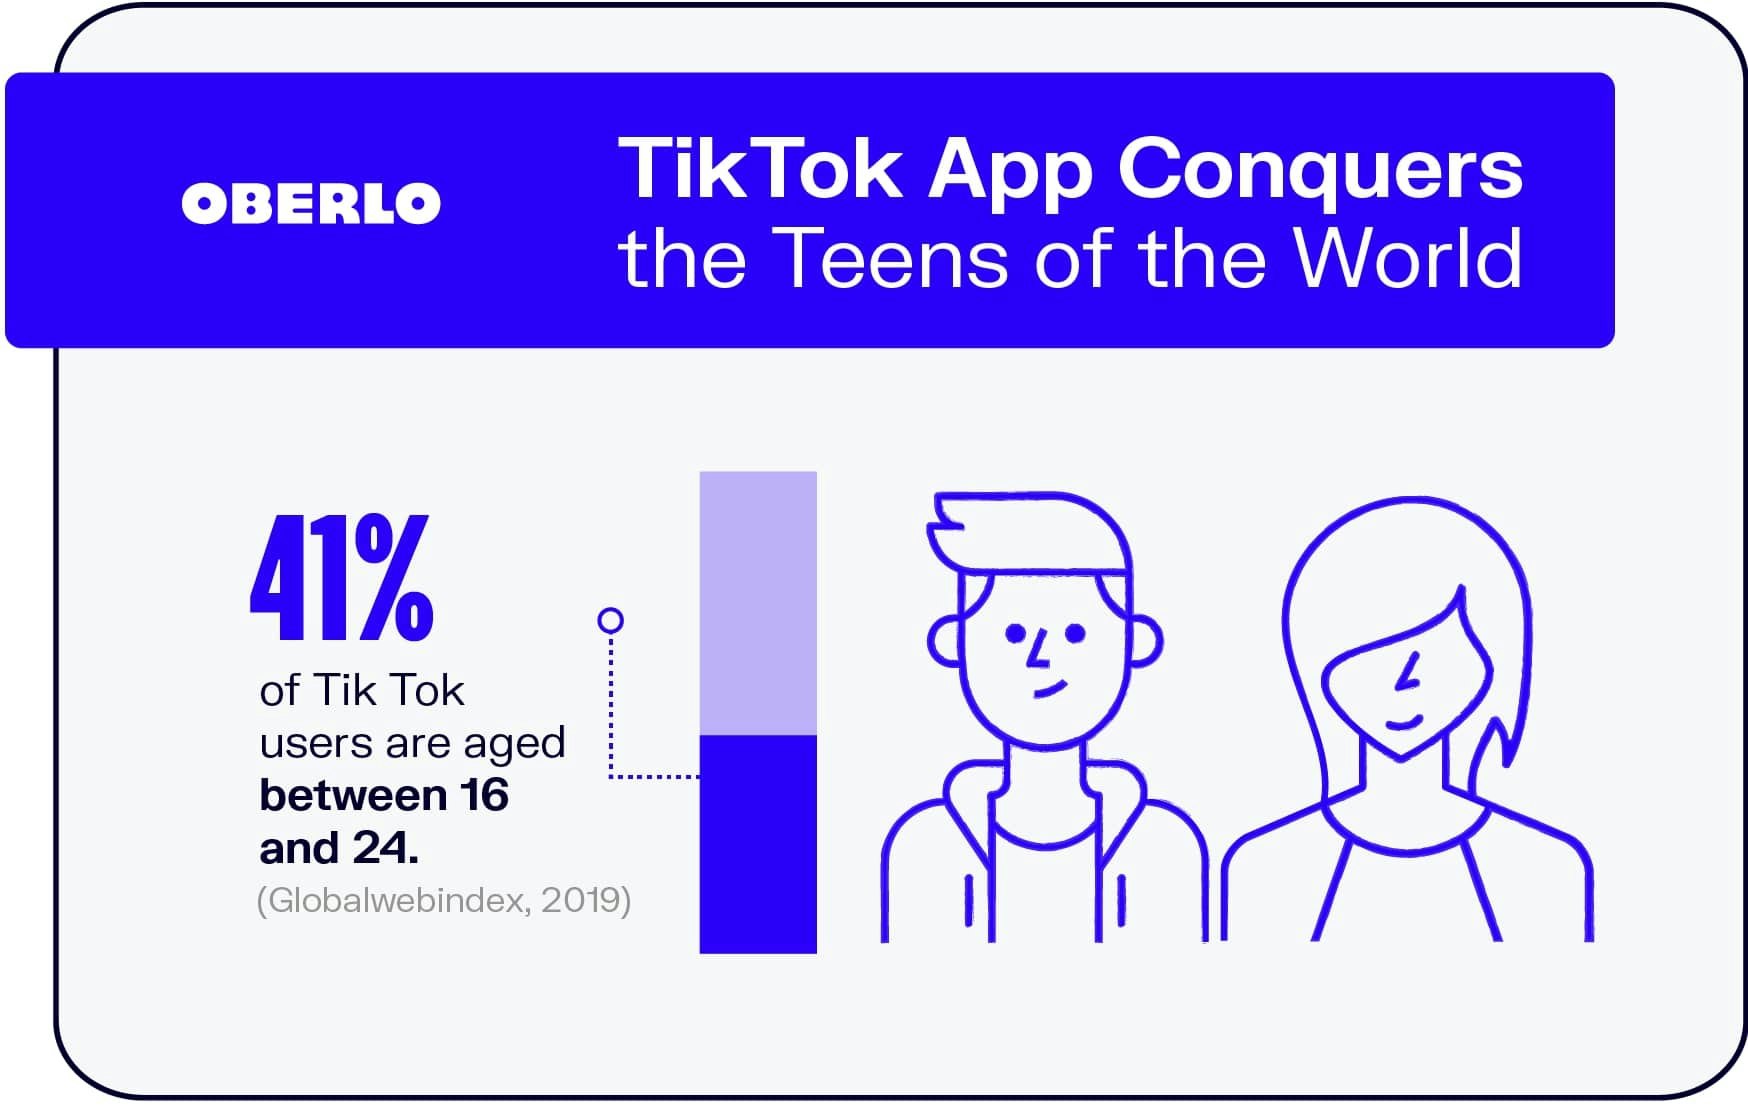 TikTok App Conquers the Teens of the World